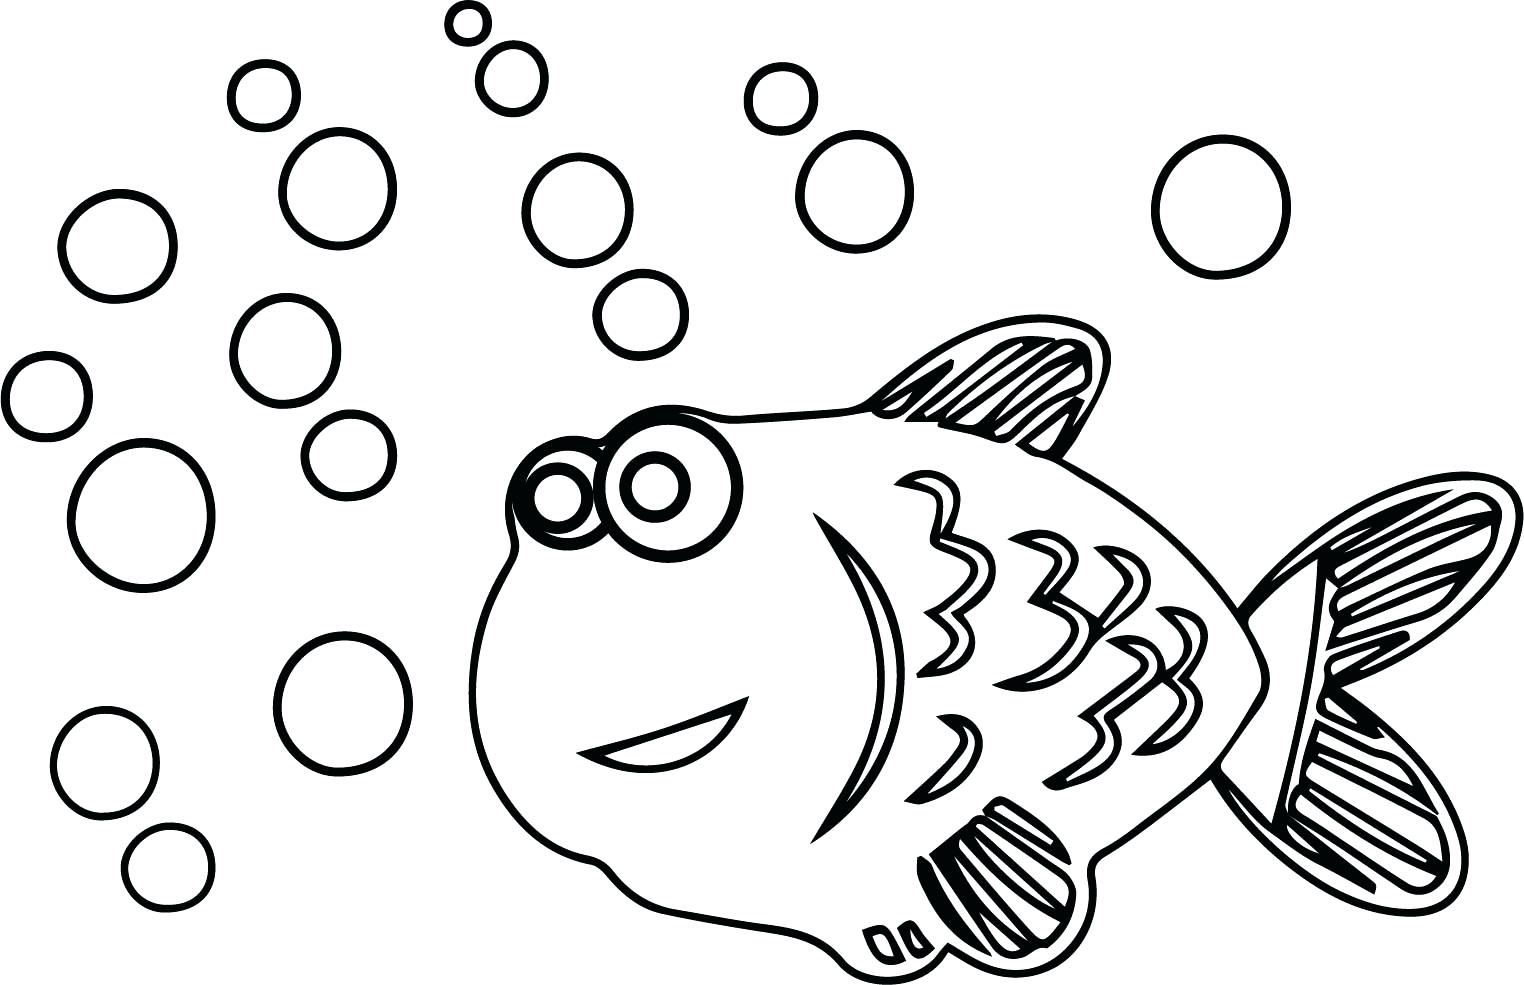 Fishing Pole Coloring Page at GetDrawings.com | Free for personal use